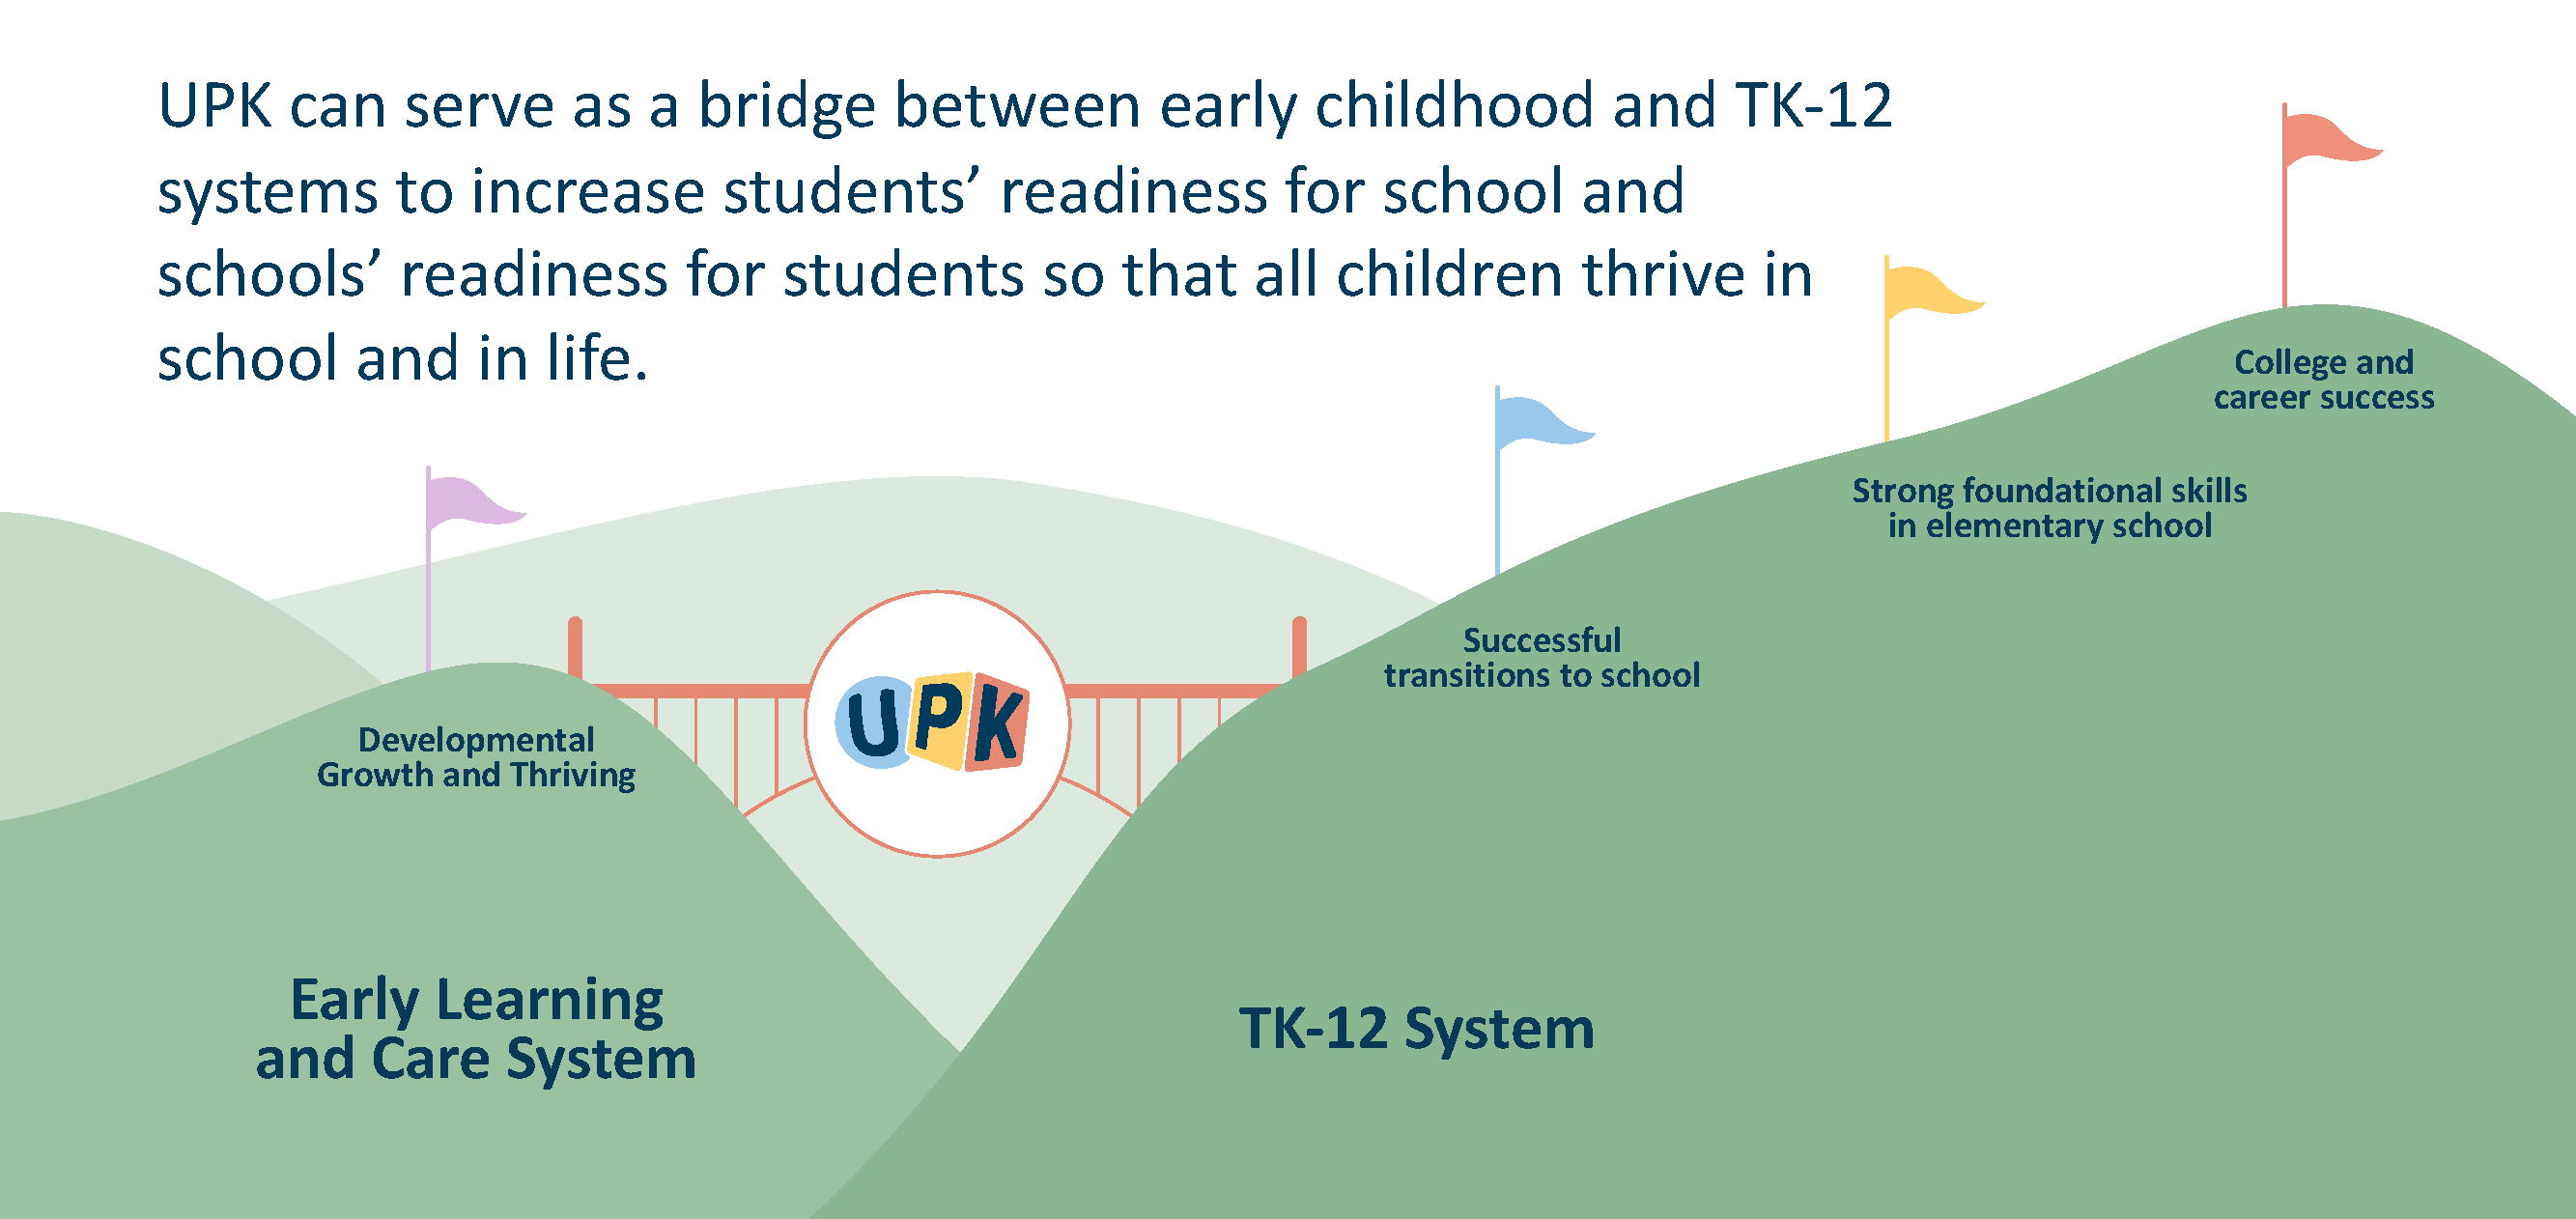 UPK can serve as a bridge between early childhood and TK-12 systems to increase students' readiness for school and schools' readiness for students so that all children thrive in school and in life.